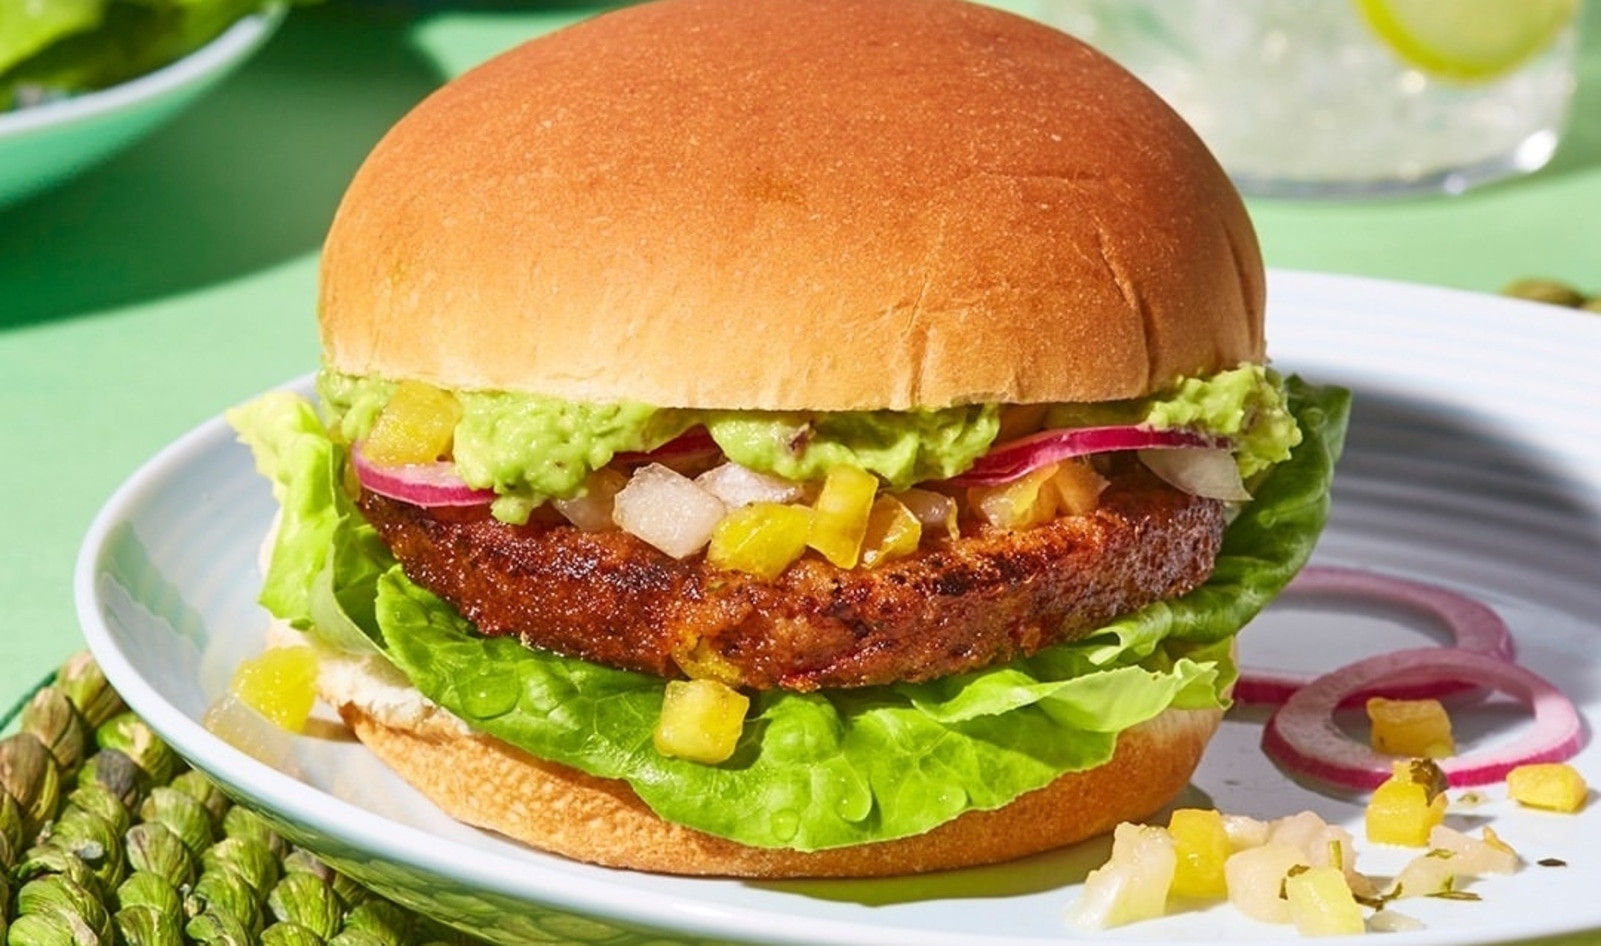 Forget Meat, the Veggie Burger Is King: 5 Top Vegan Picks From a Nutritionist